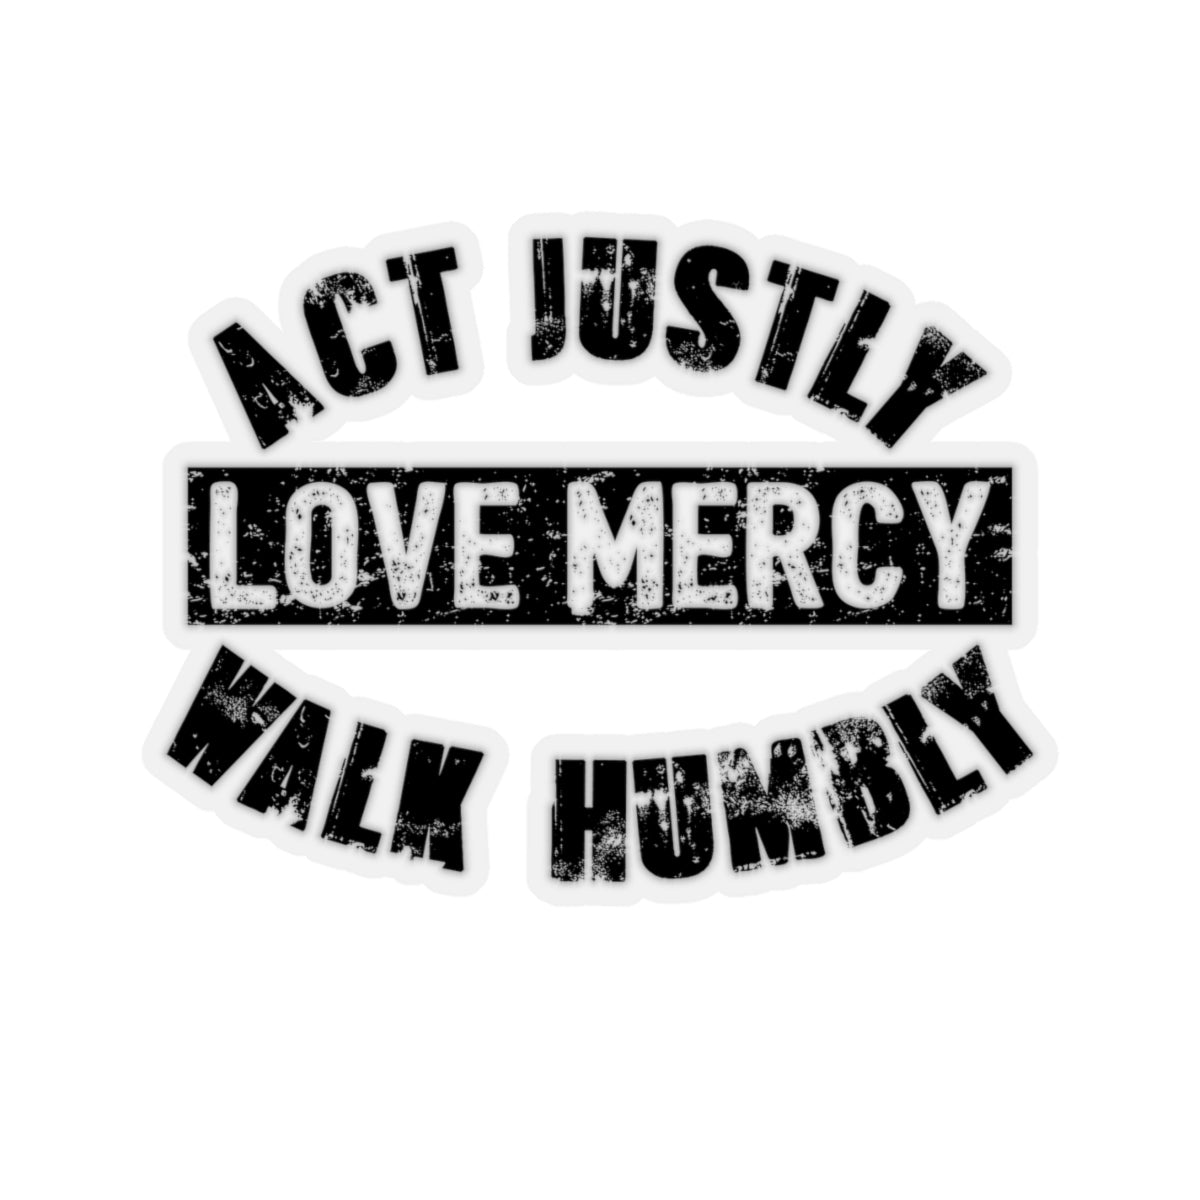 Act Justly Kiss-Cut Stickers